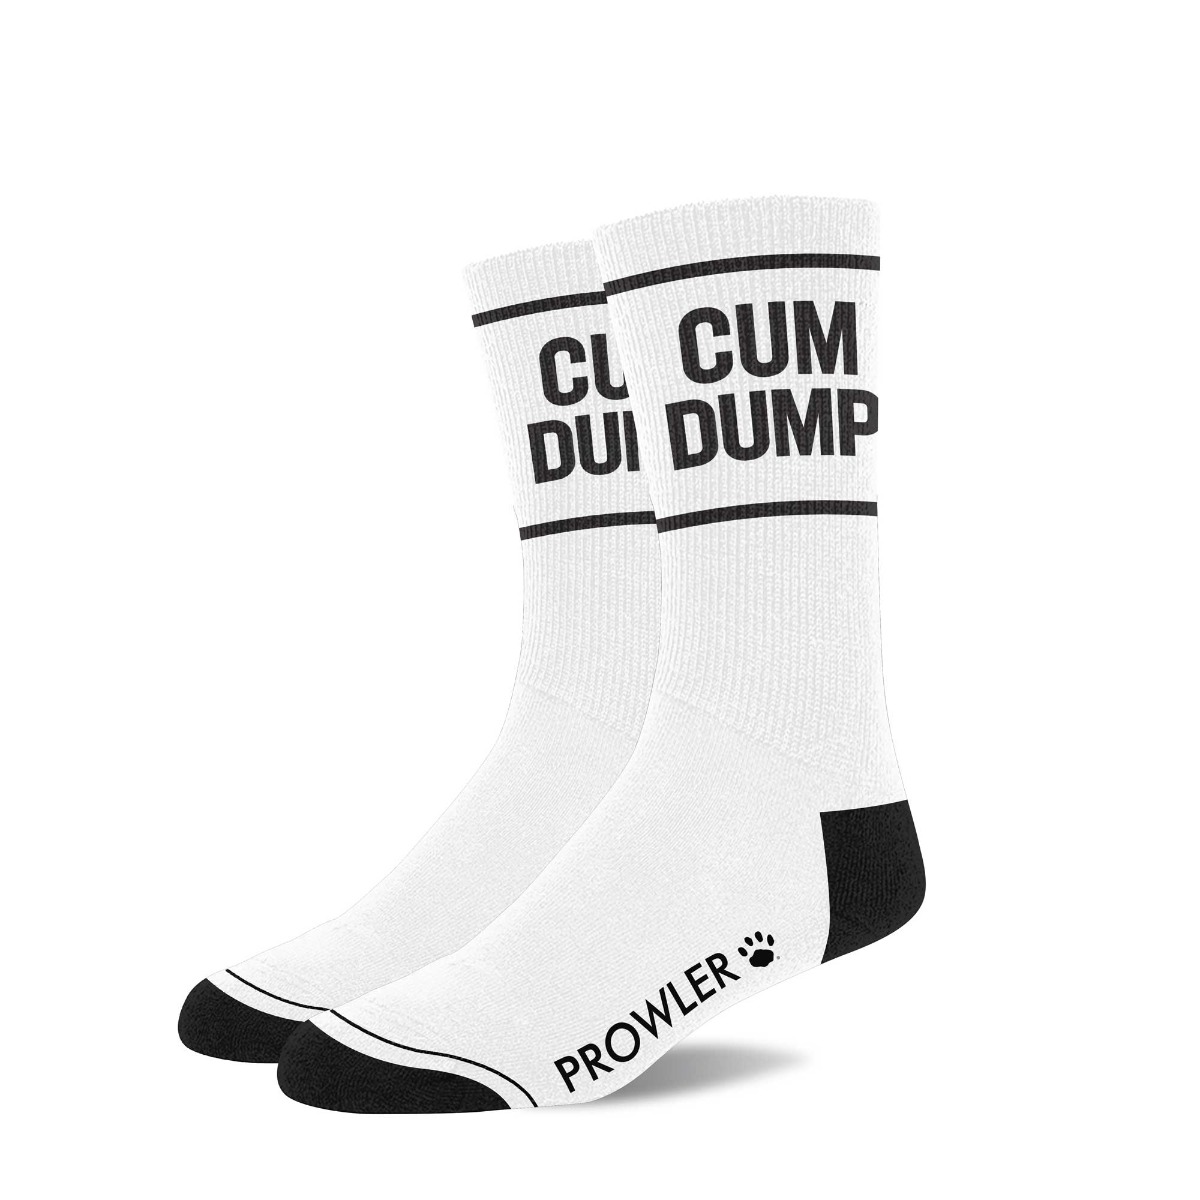 Buy The Prowler Red Cum Dump Socks At Cloud Climax 3971